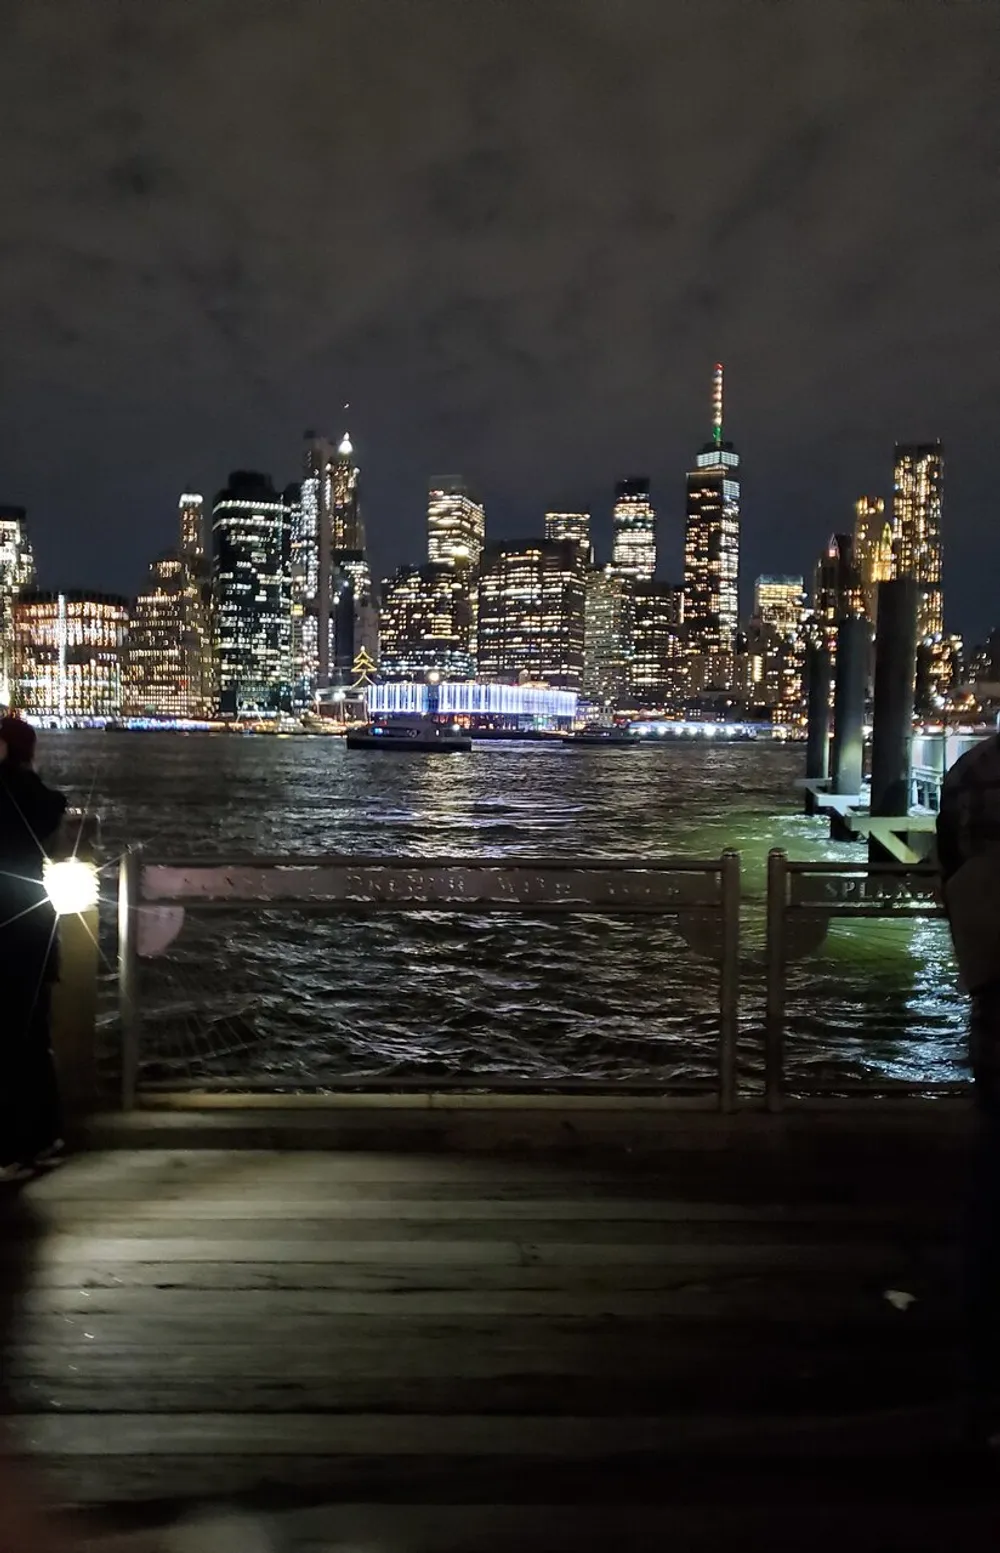 A nighttime view of a brightly lit city skyline seen from a pier with dark waters in the foreground